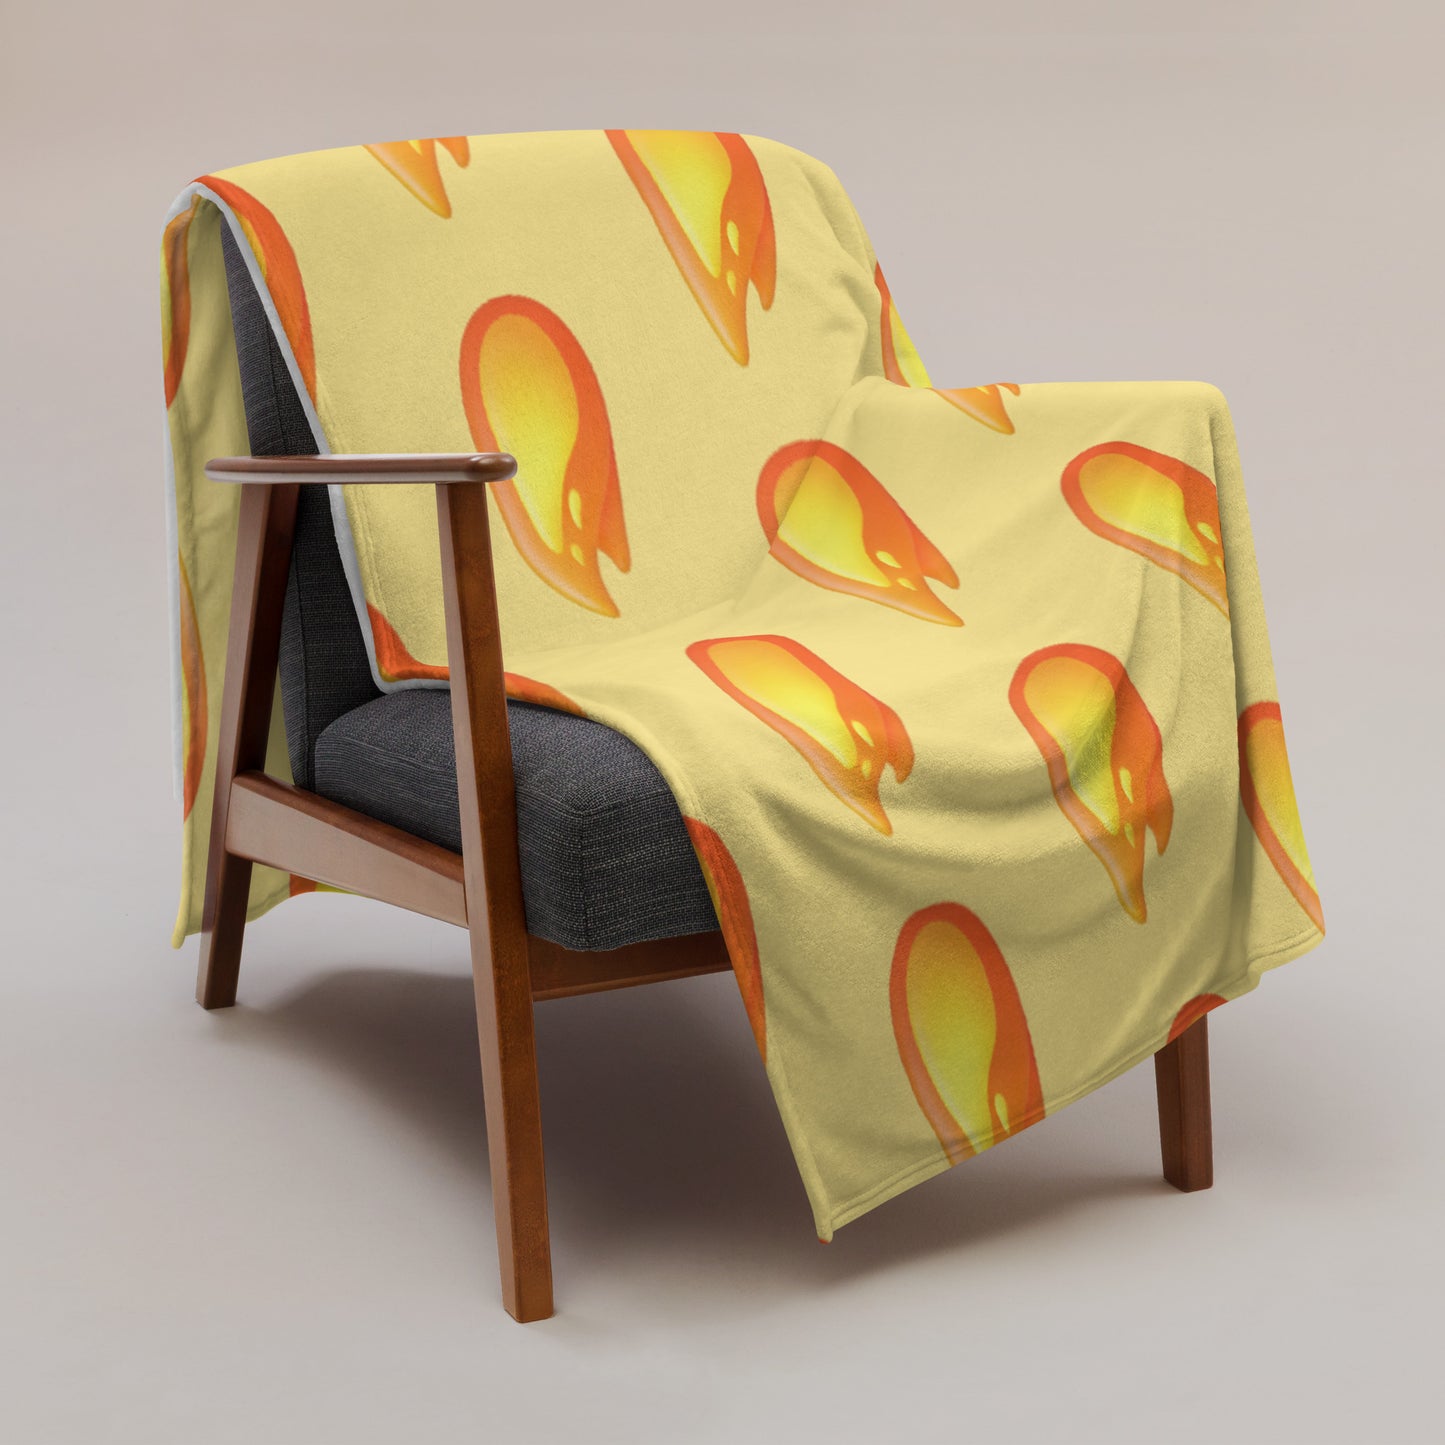 Soft-Touch Throw Blanket: Flame Emojis